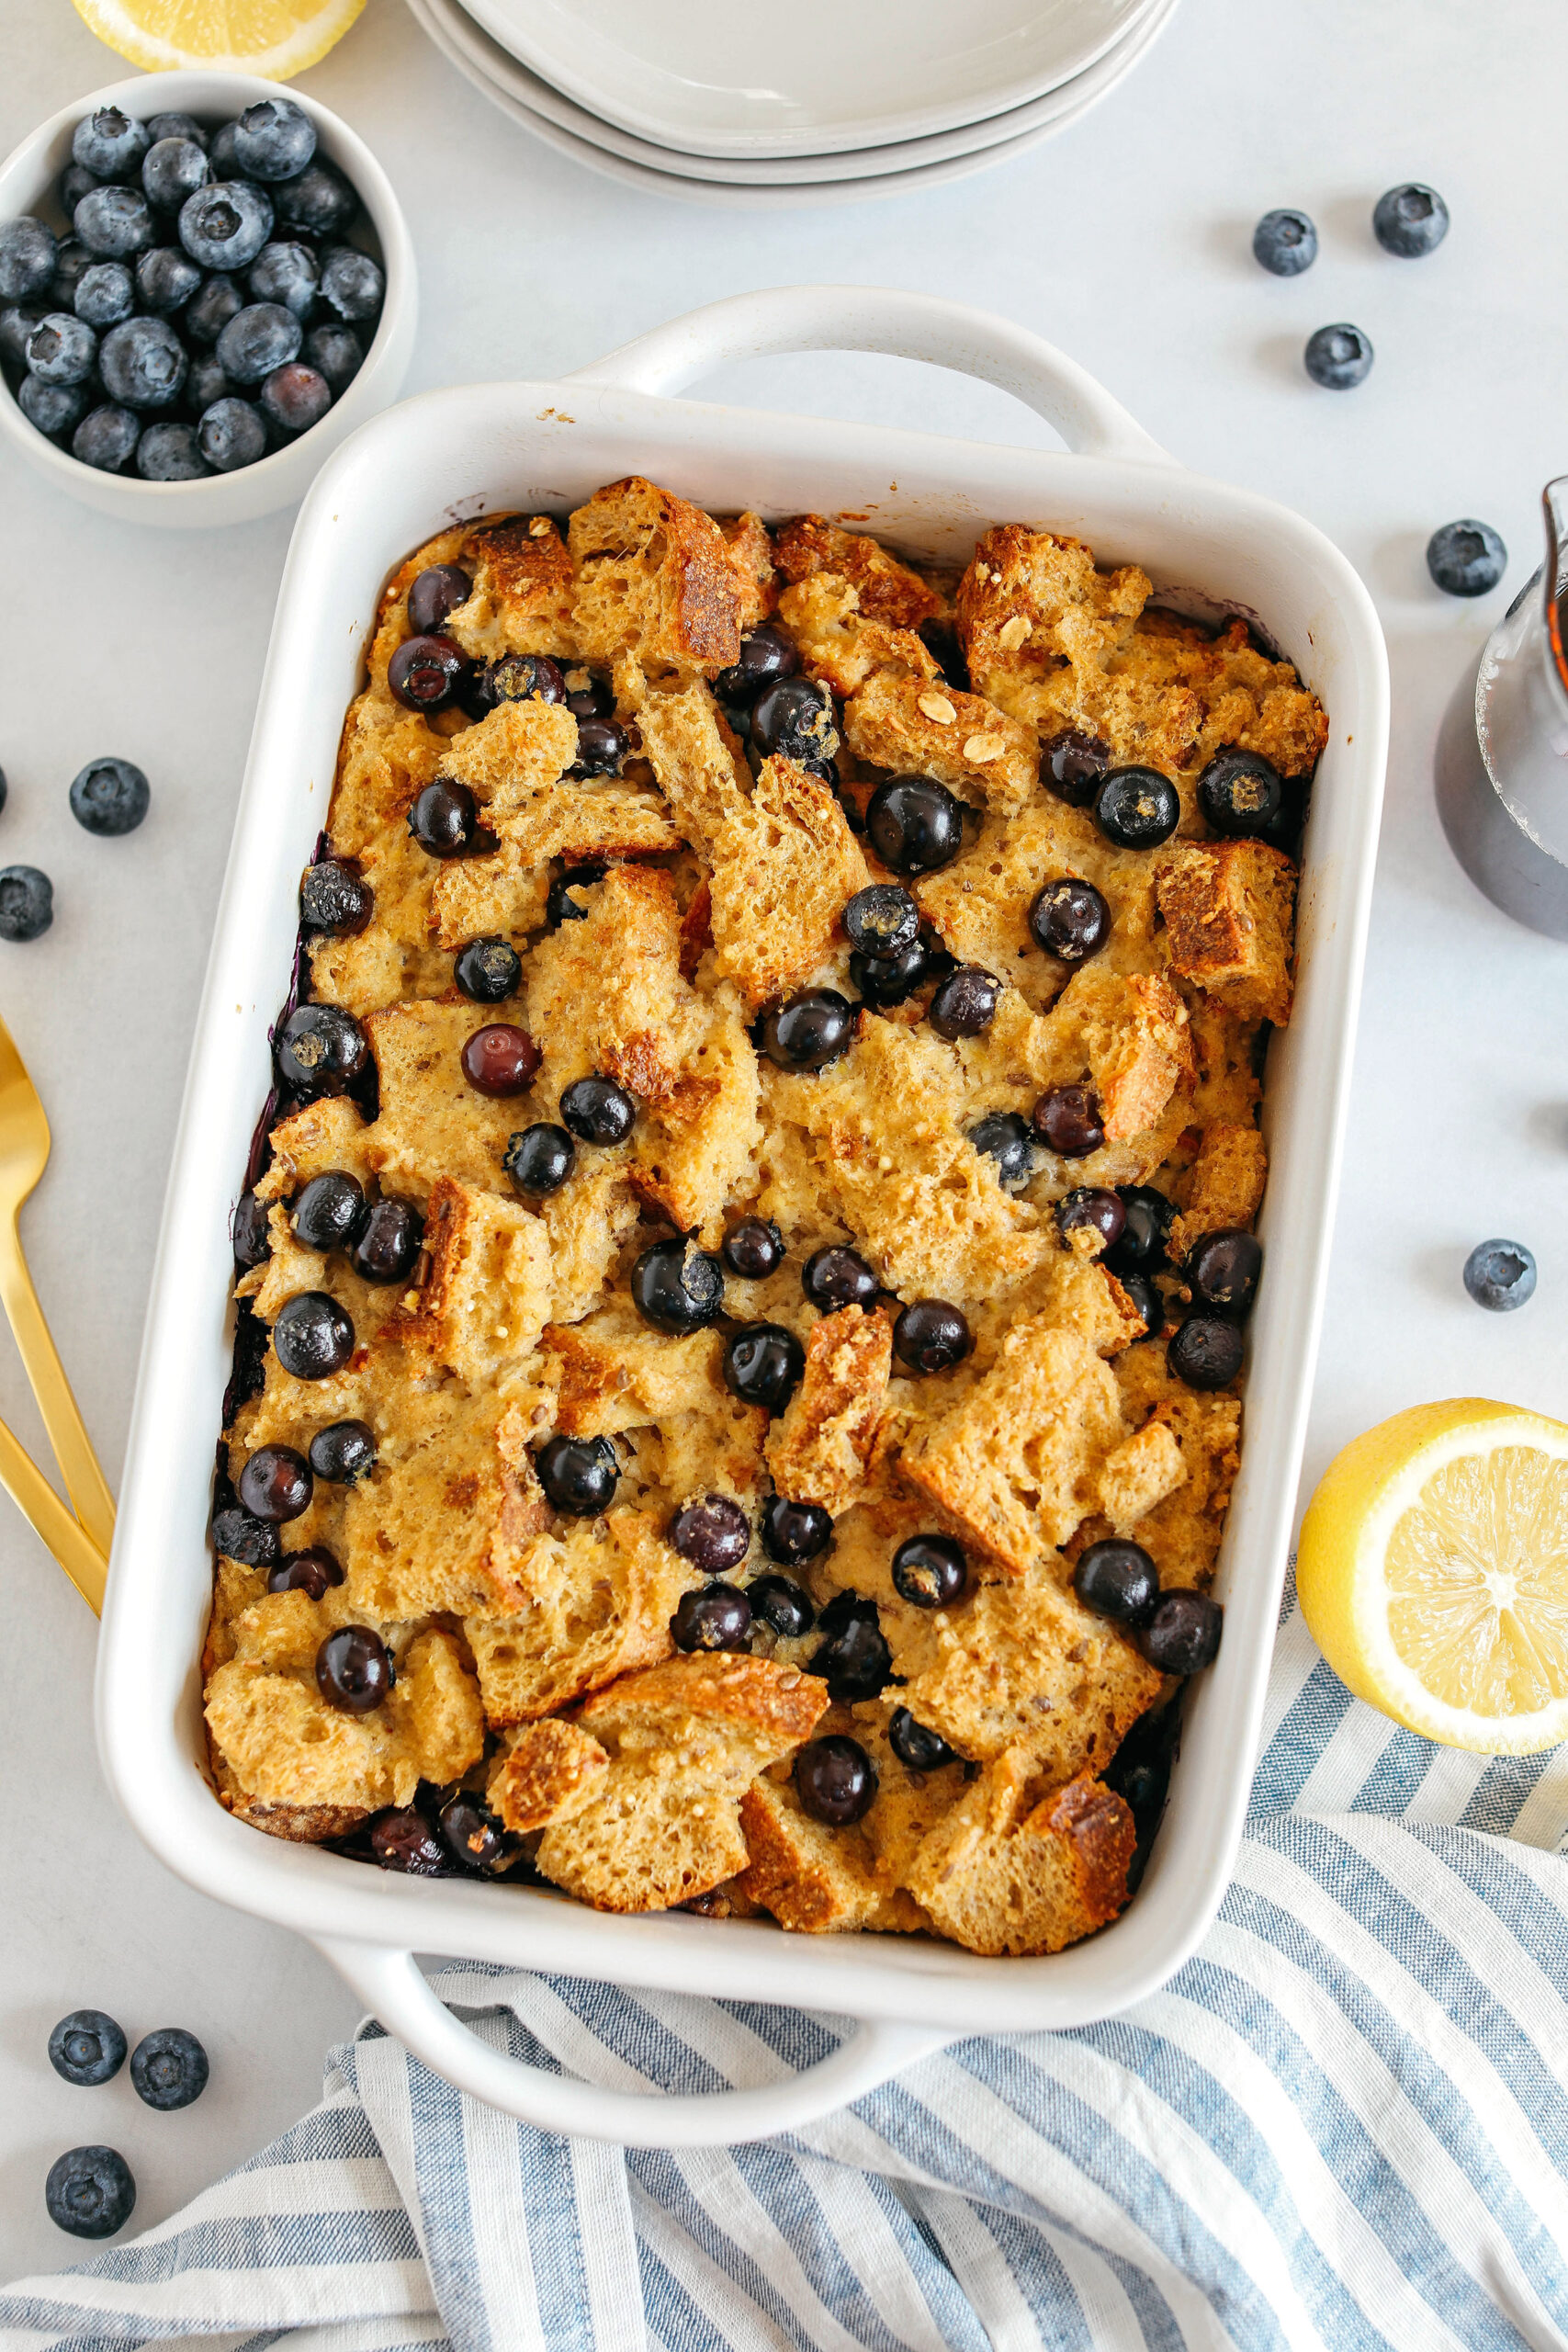 Warm and delicious Blueberry Lemon Bread Pudding lightened up with healthier ingredients and zero butter or refined sugar!  The perfect cozy dish for breakfast, brunch or dessert!